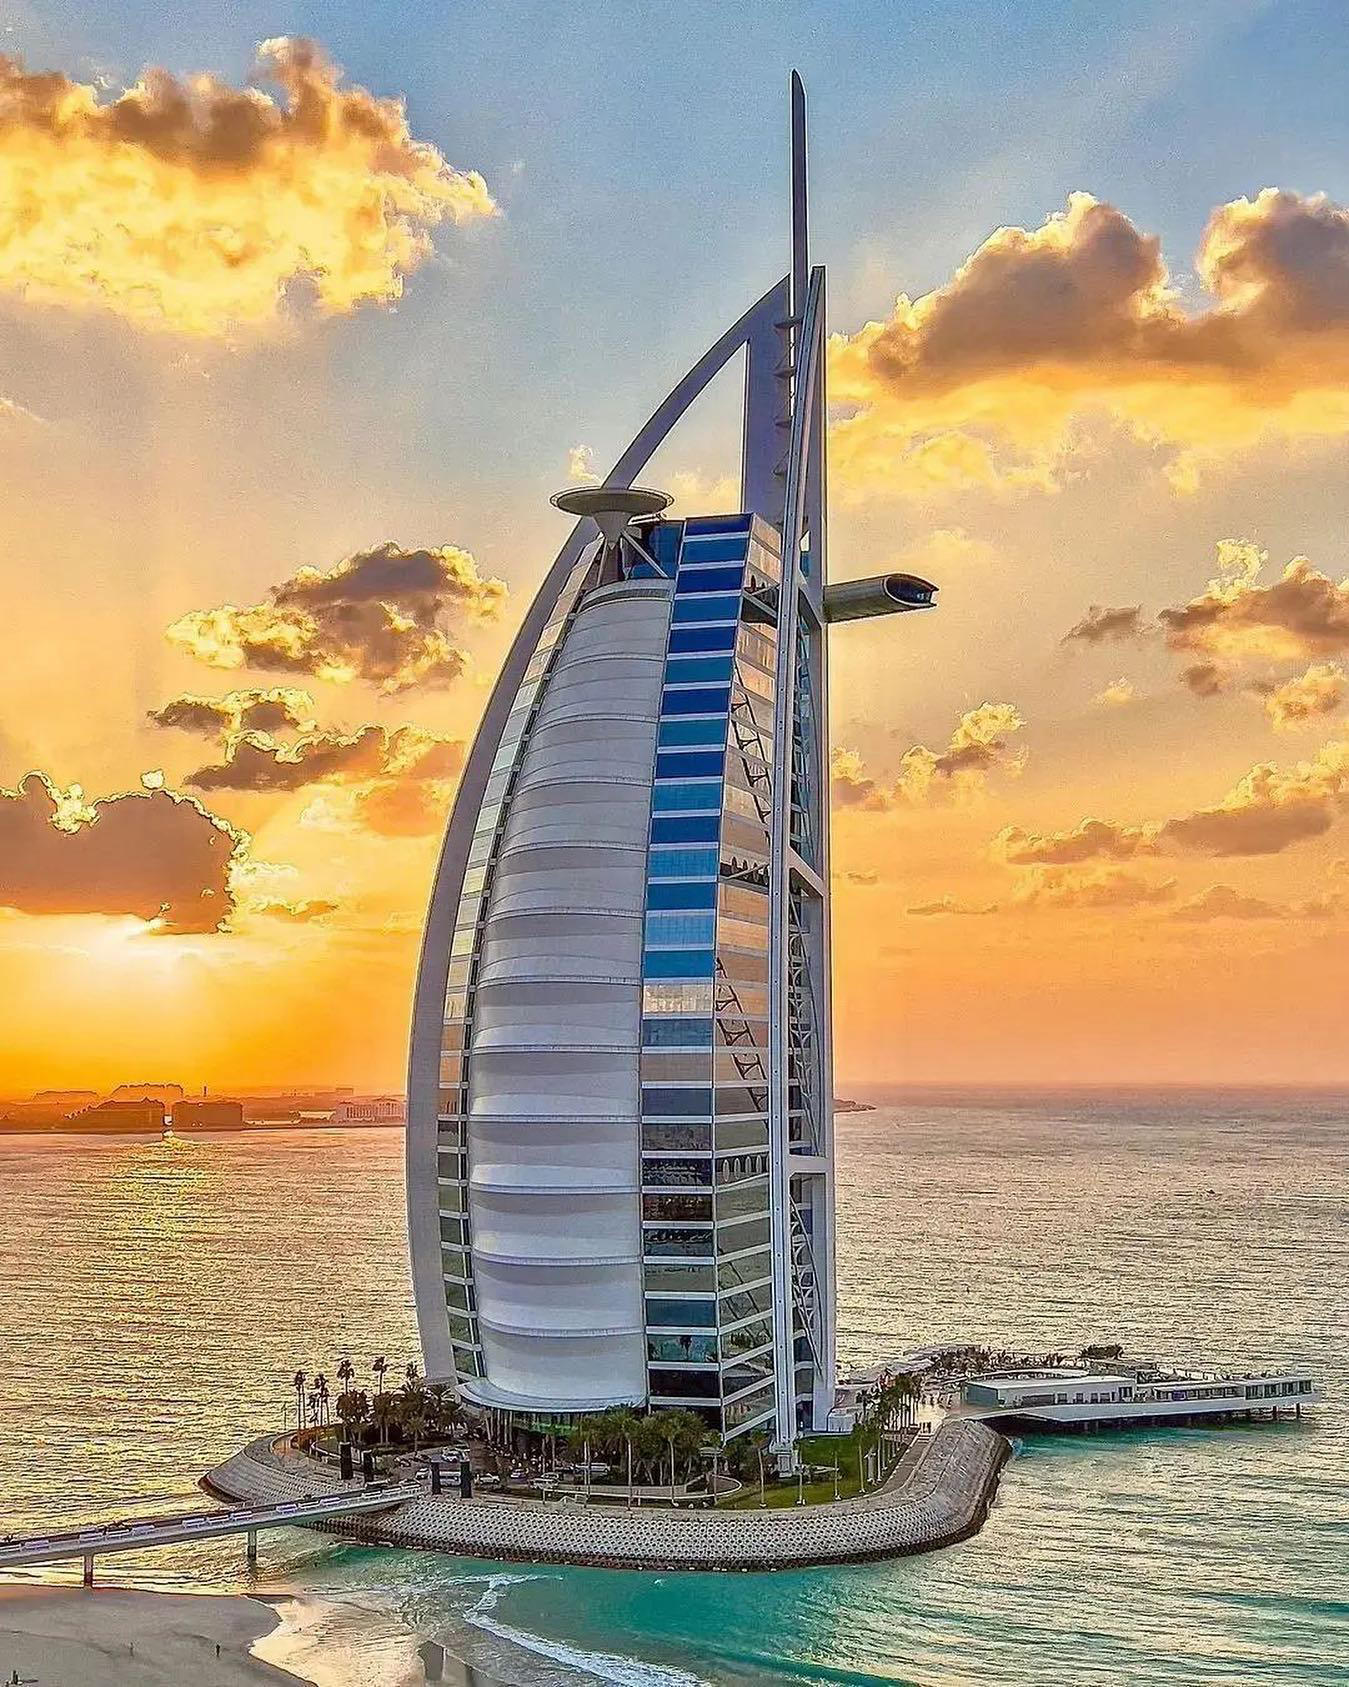 image  1 Burj Al Arab - Today, we celebrate 23 years of breathtaking experiences and unforgettable moments at